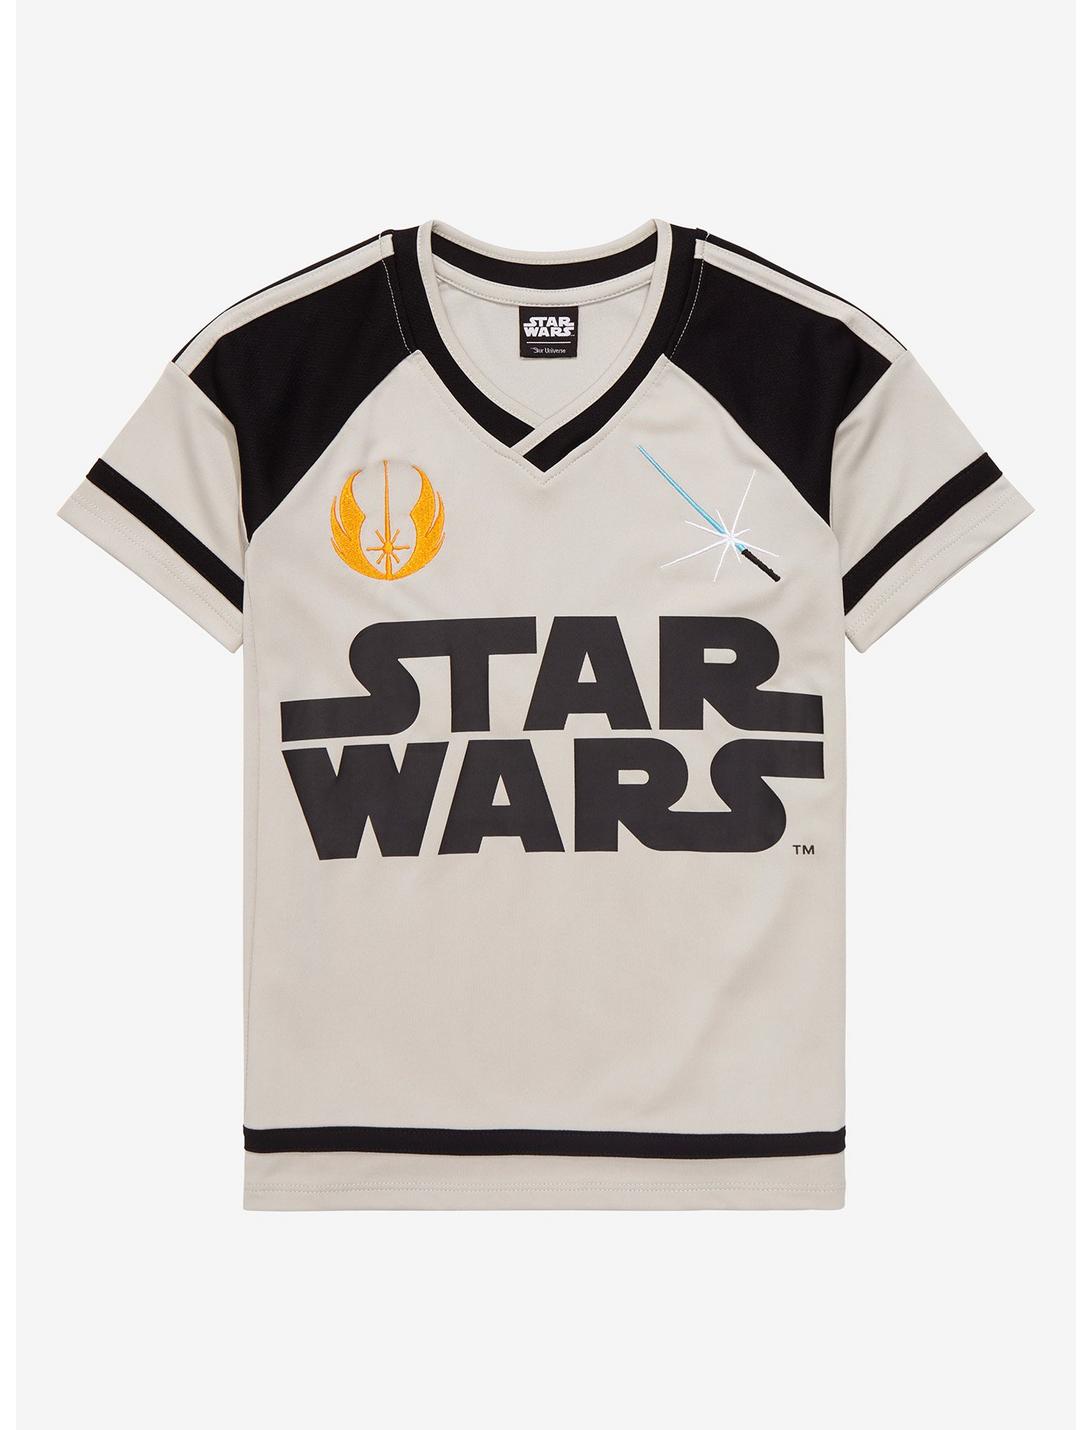 Star Wars Jedi Knight Youth Soccer Jersey, GREY, hi-res